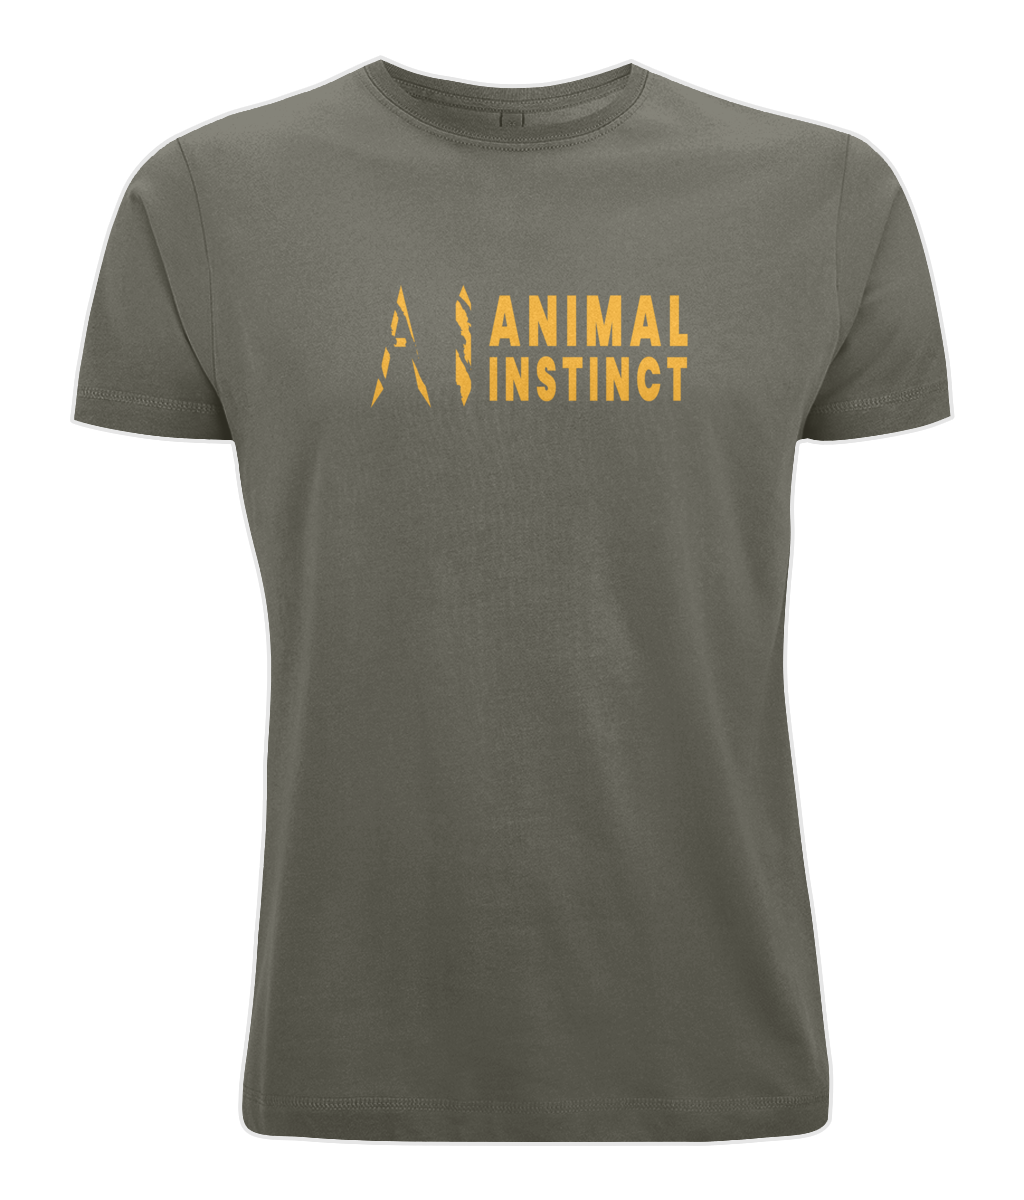 Mens light grey Graphic Animal Instinct T-Shirt with Premium gold AI logo and Animal Instinct written in premium gold Across the middle of the chest